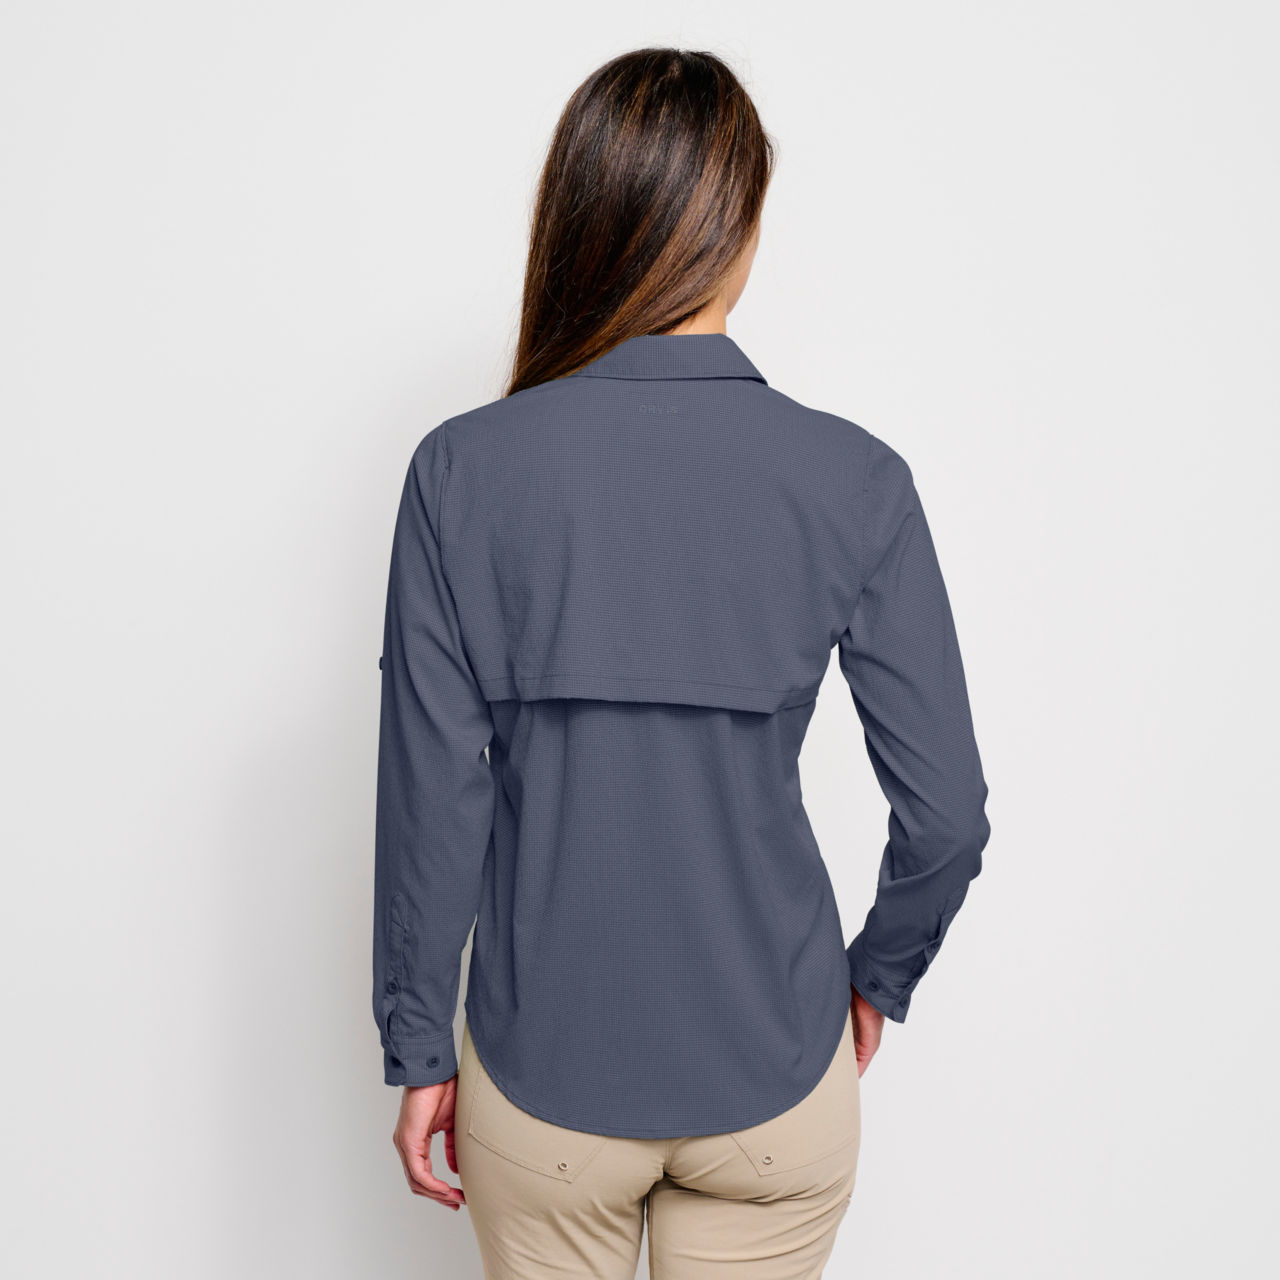 Women’s Open Air Caster Long-Sleeved Shirt - CARBON image number 2